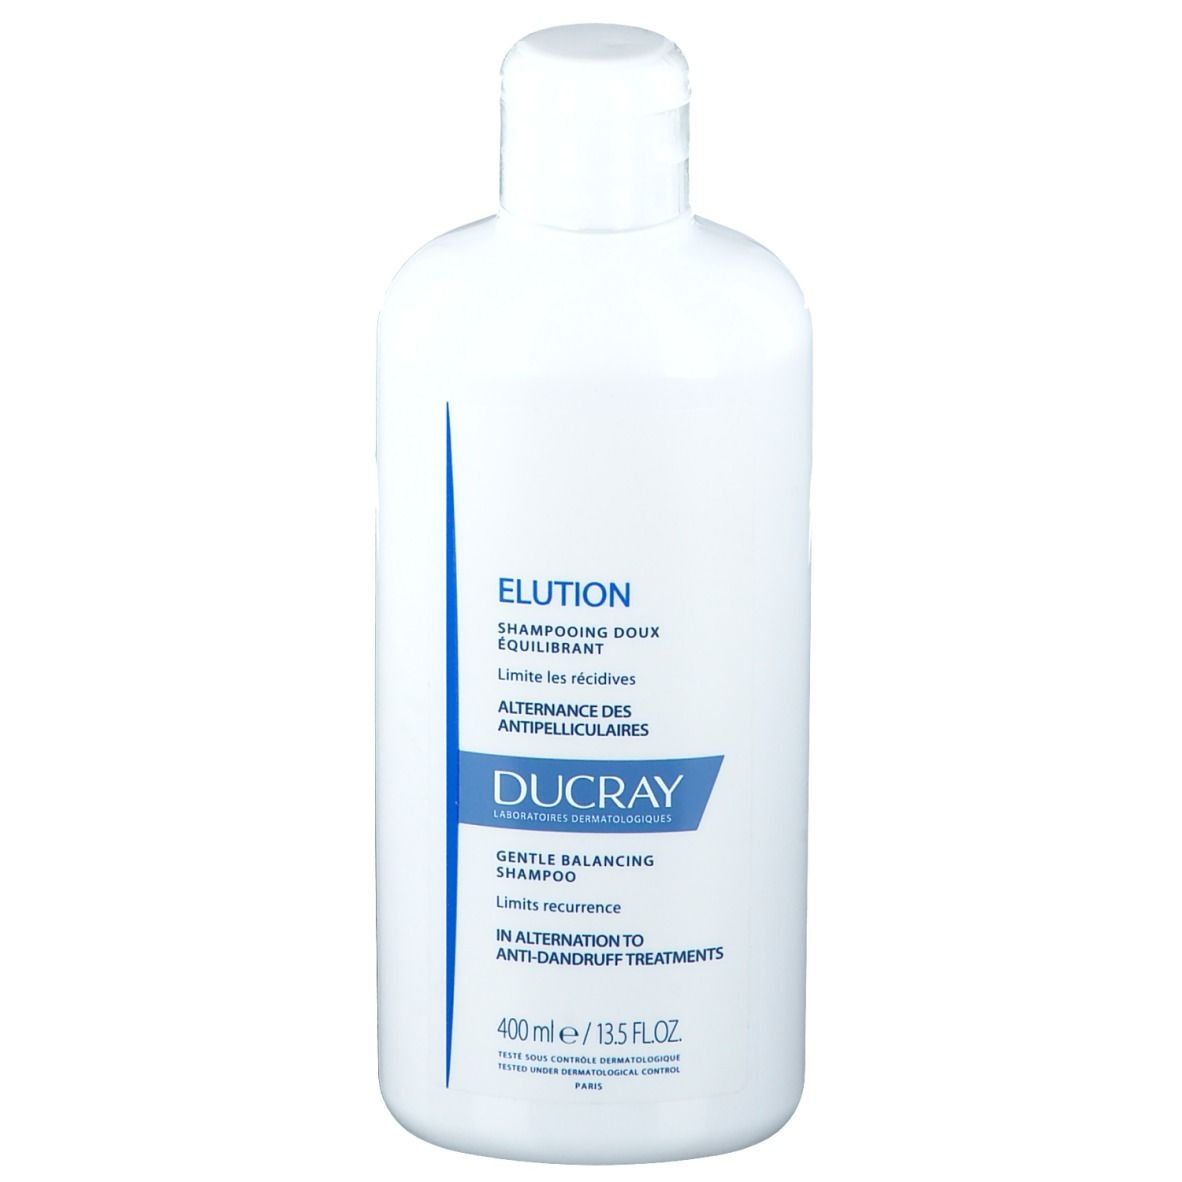 Ducray Elution Shampooing doux équilibrant